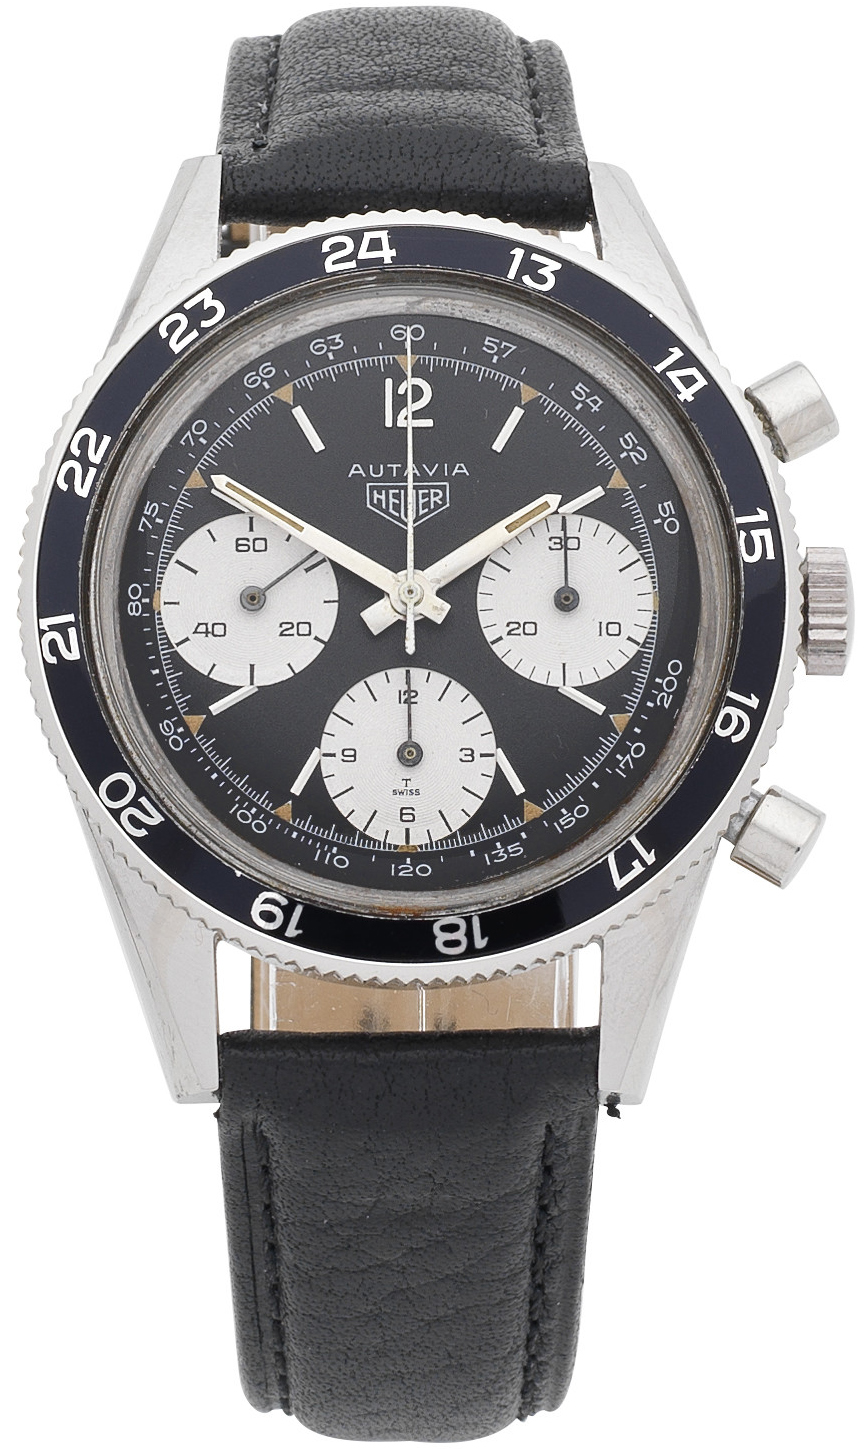 Bonhams heuer autavia stainless steel manual wind chronograph wristwatch circa 1960 offered with an estimate of 10000 15000